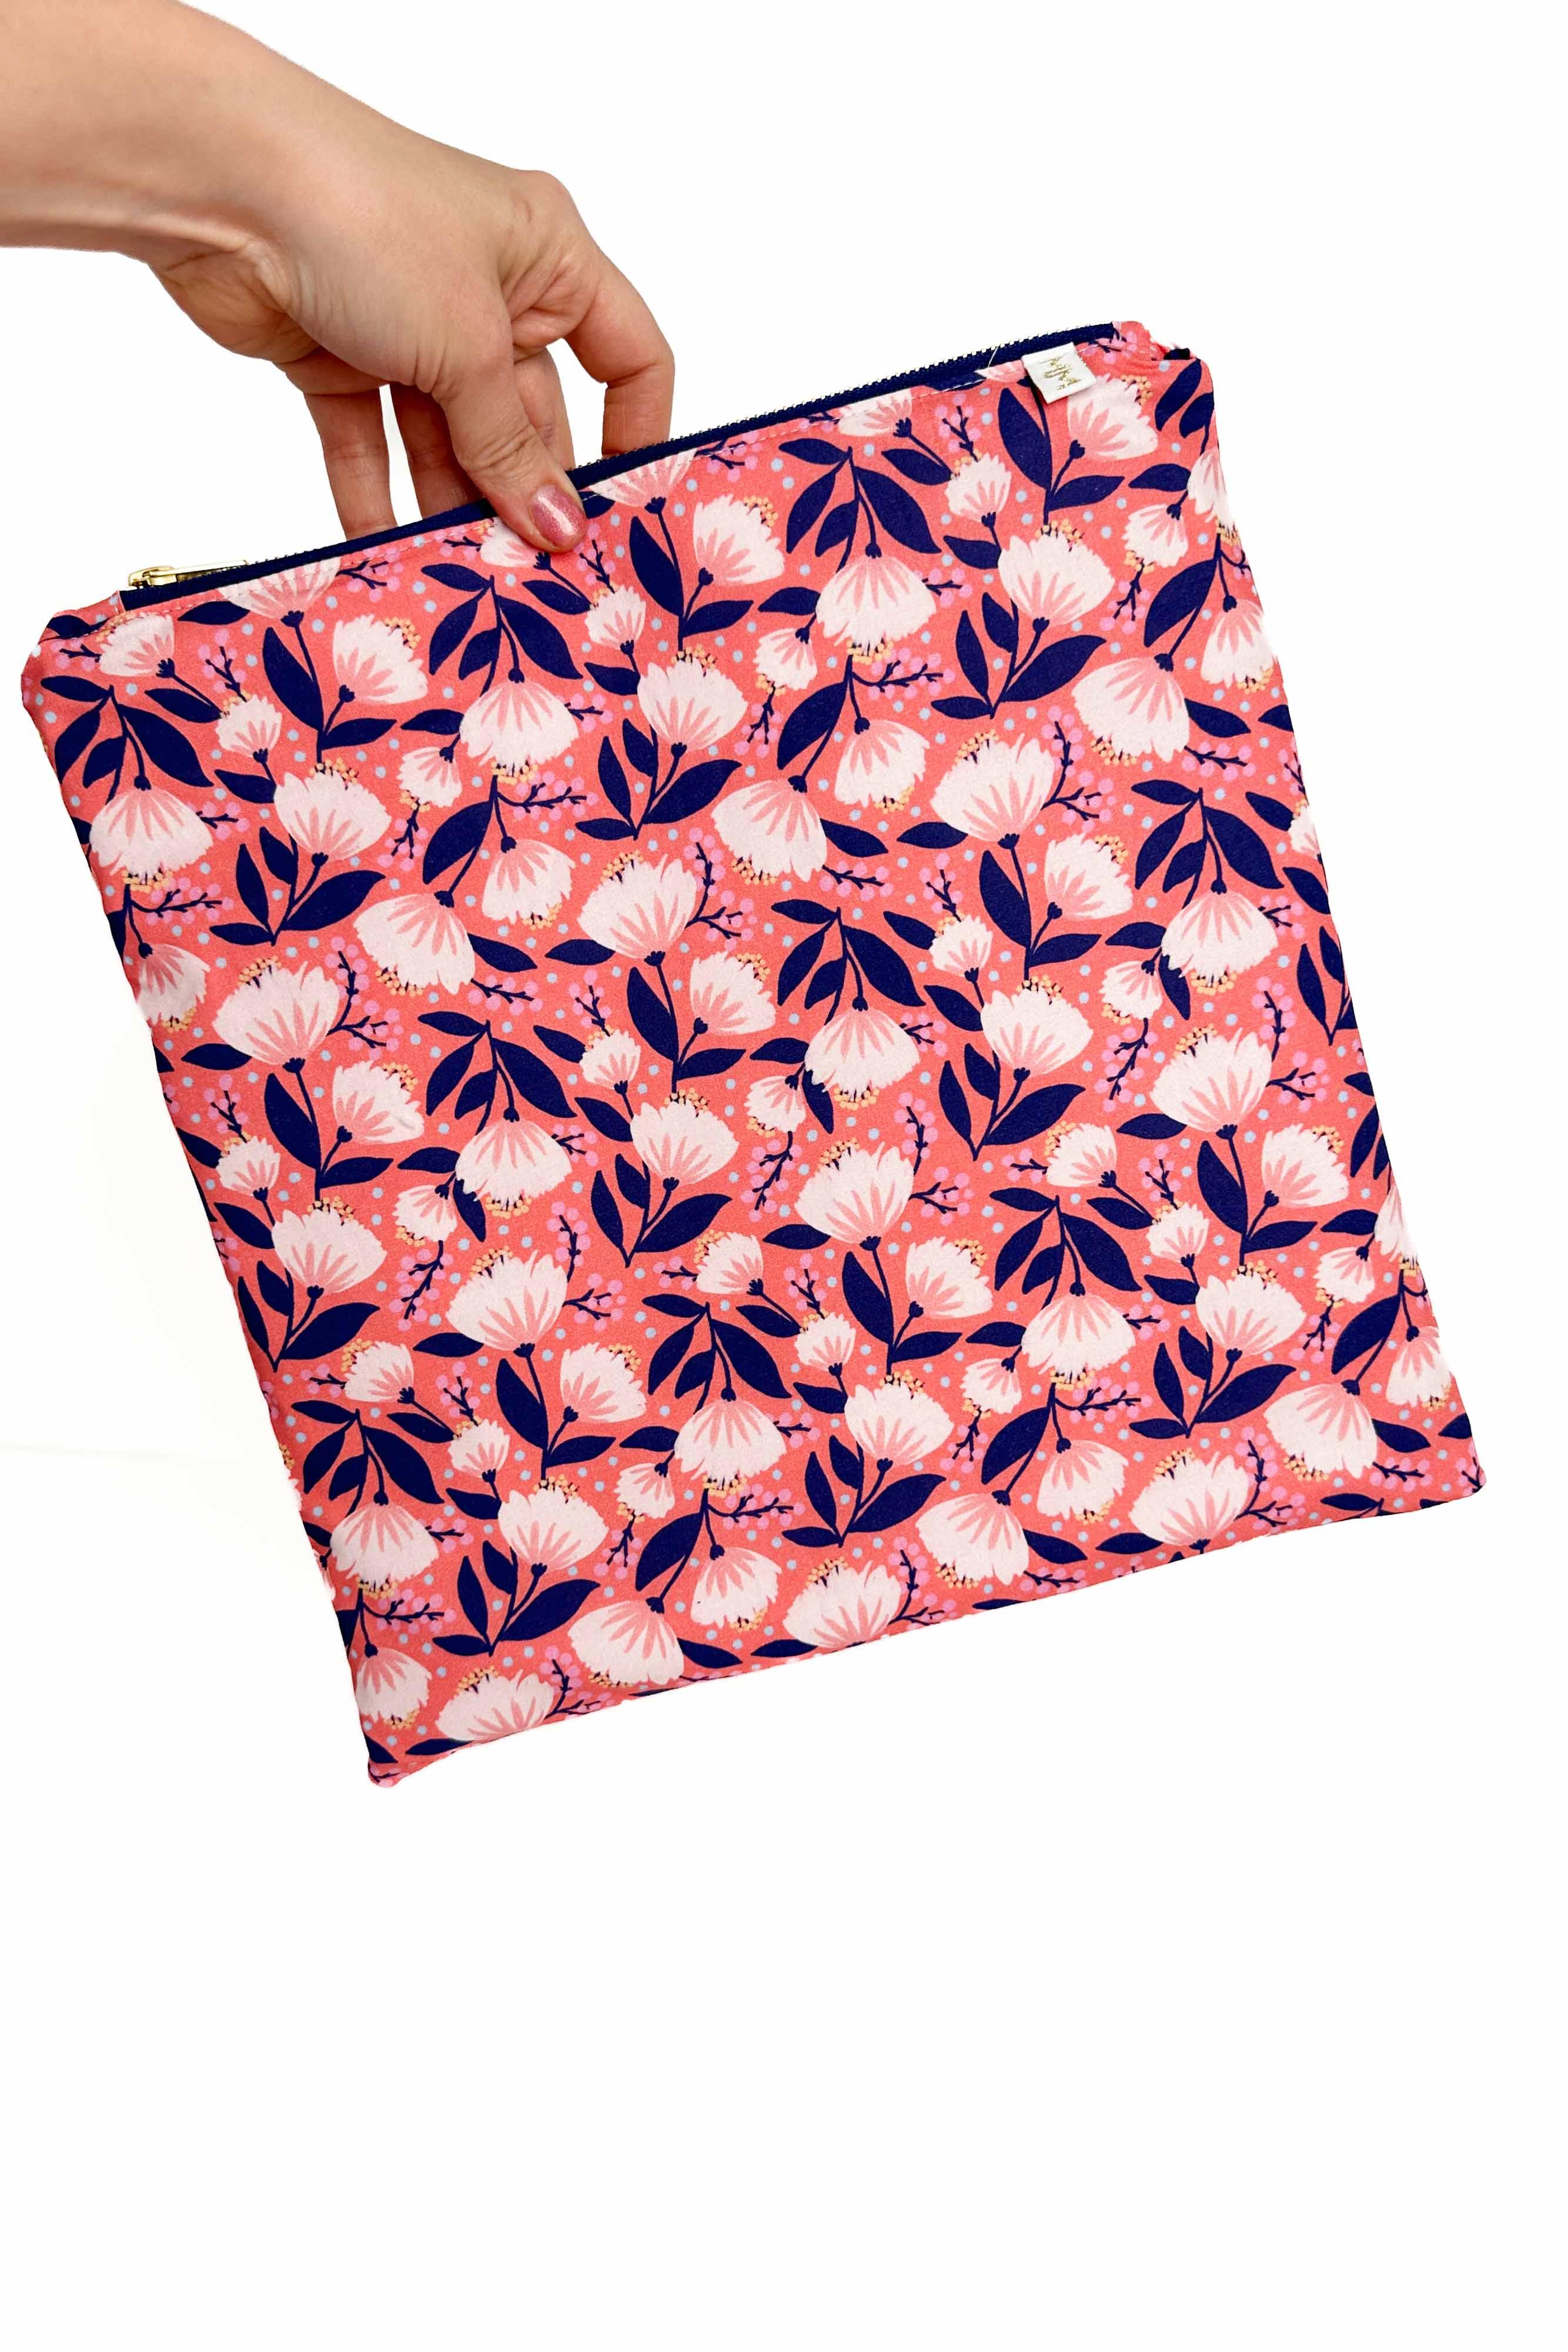 Radiant Coral Large Wet Bag READY TO SHIP - Modern Makerie